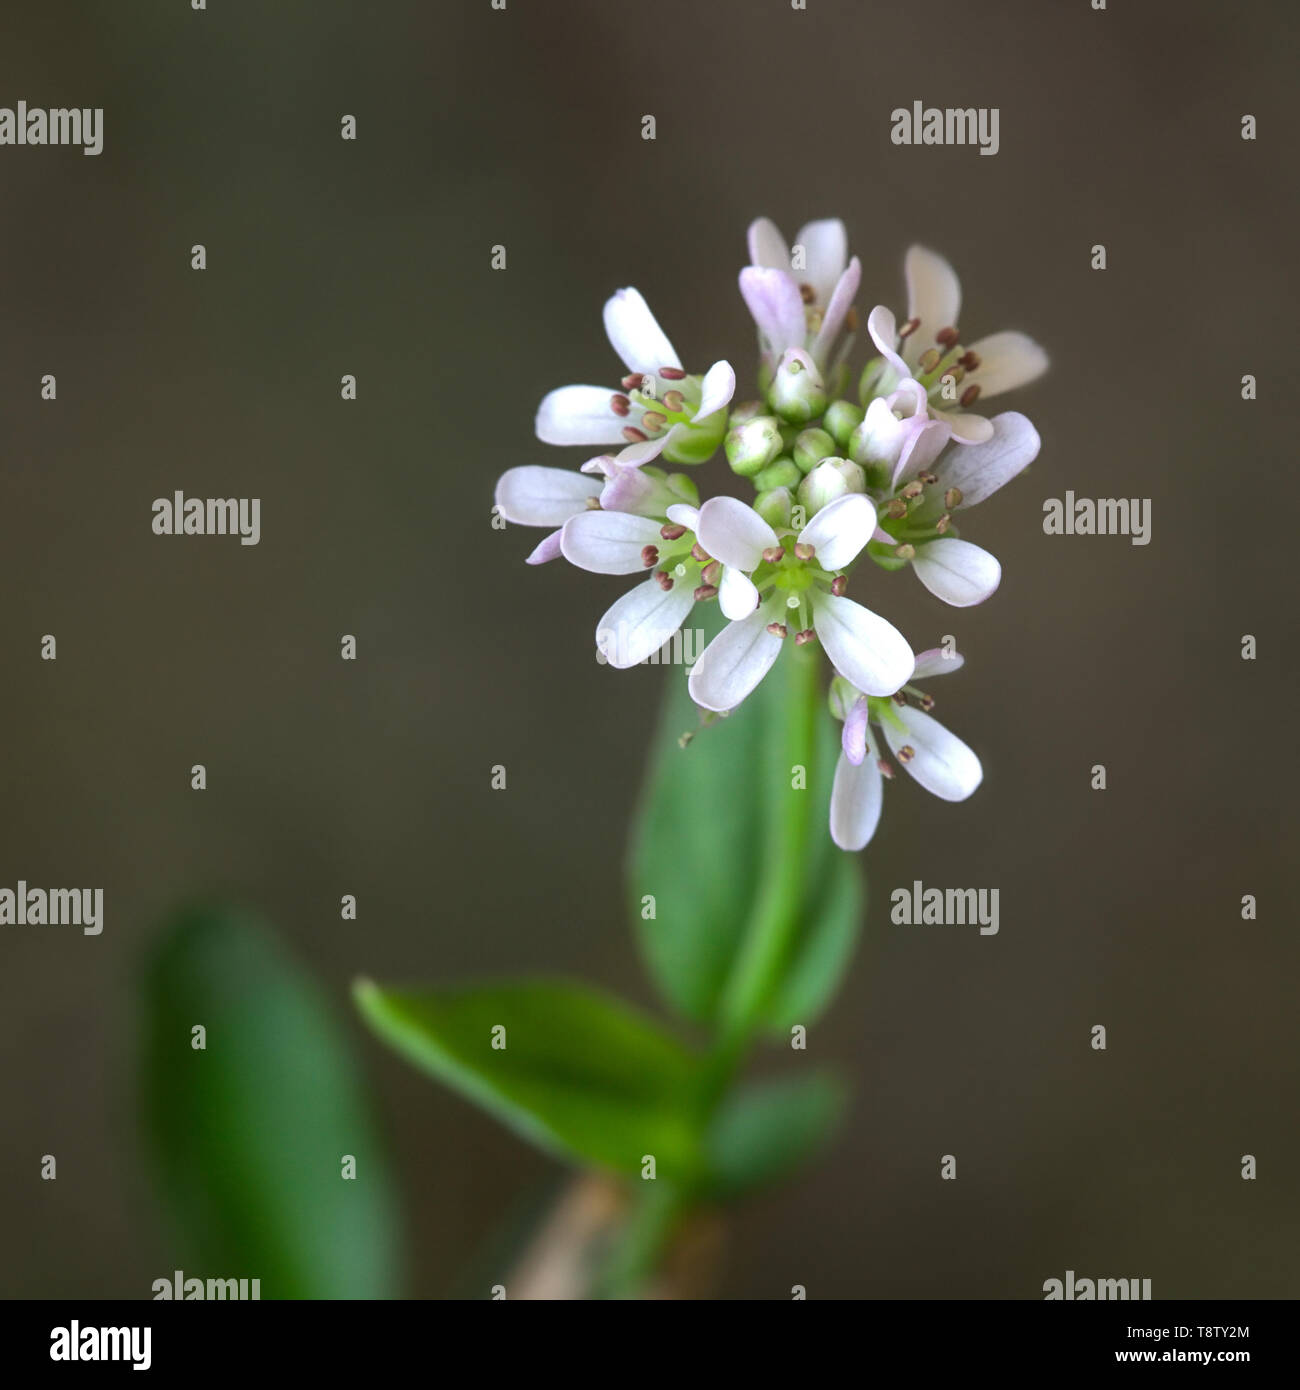 Thlaspi caerulescens, Alpine Penny-cress also known as alpine pennygrass Stock Photo